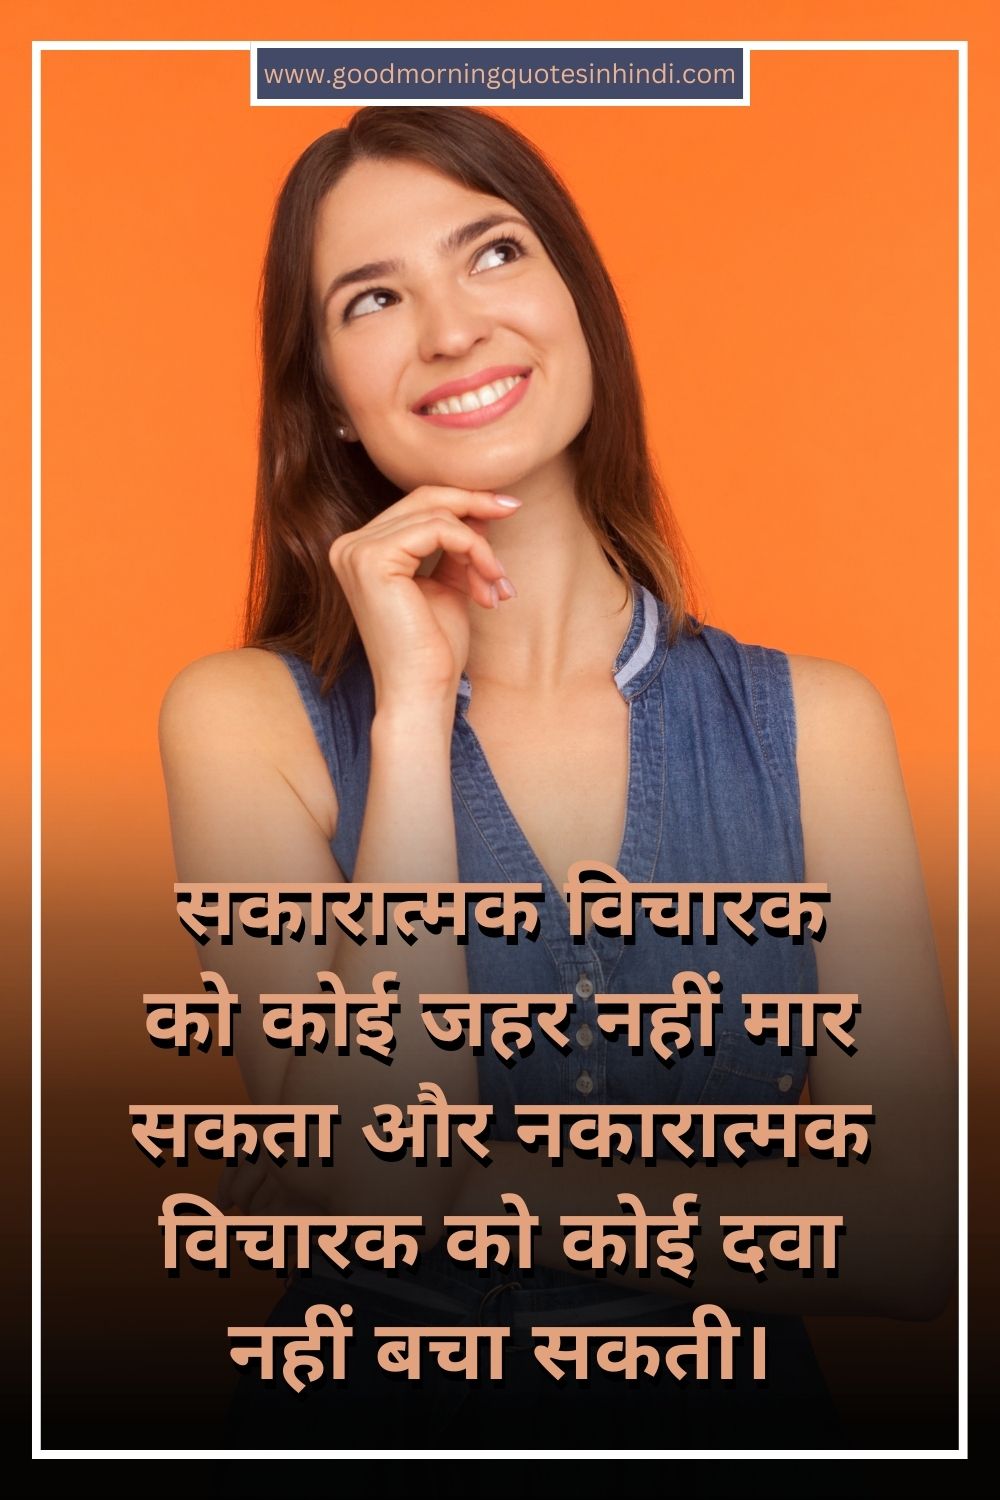 Good Morning With Positive Words in Hindi